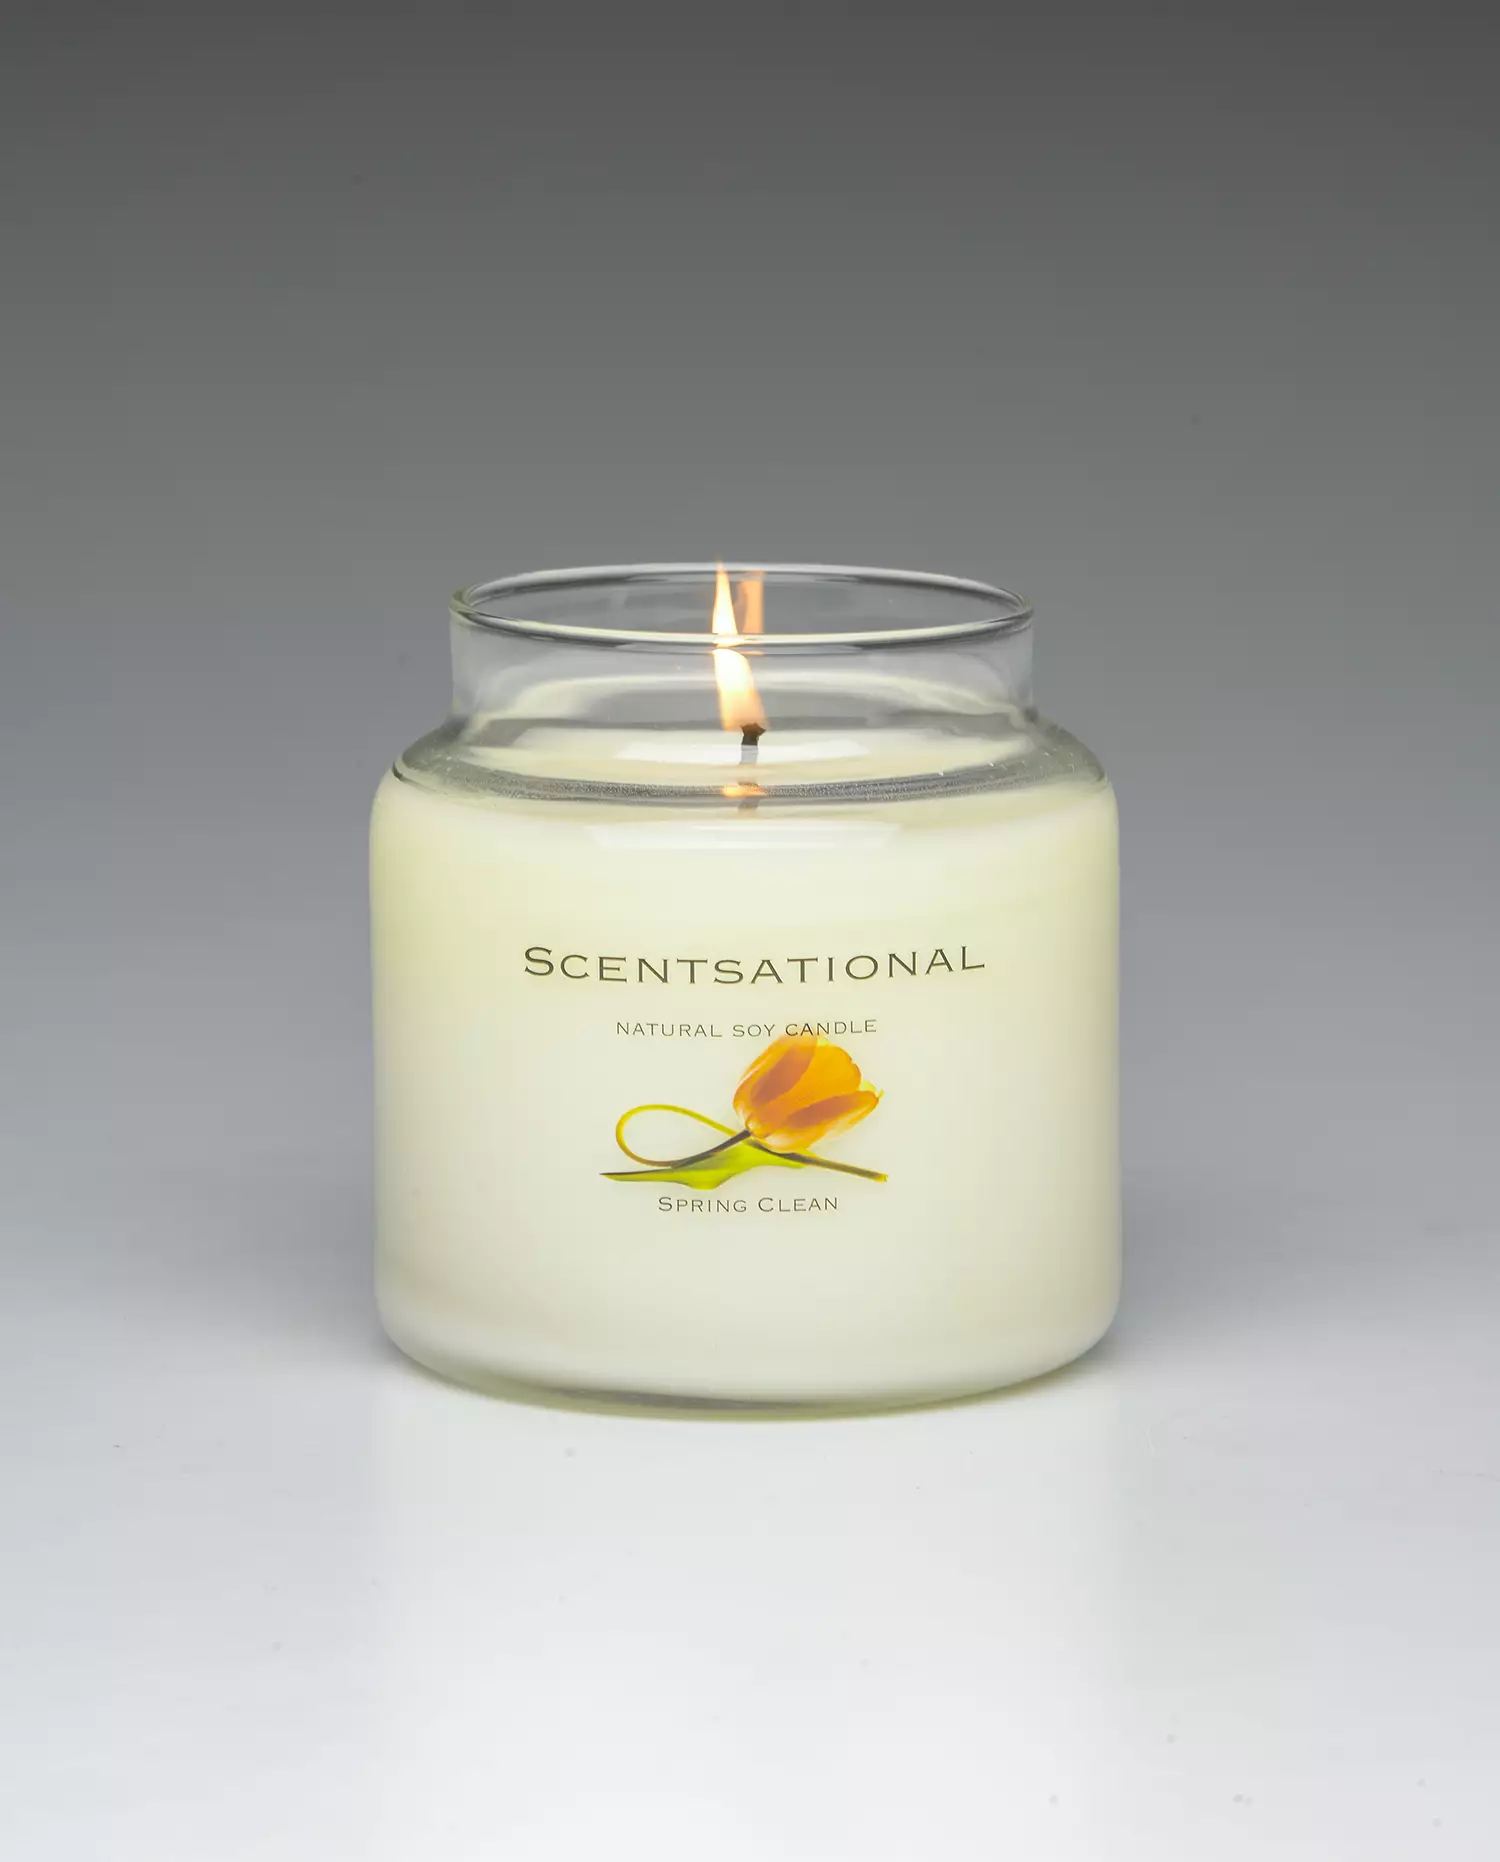 Spring Clean 19oz Scented Candle burning